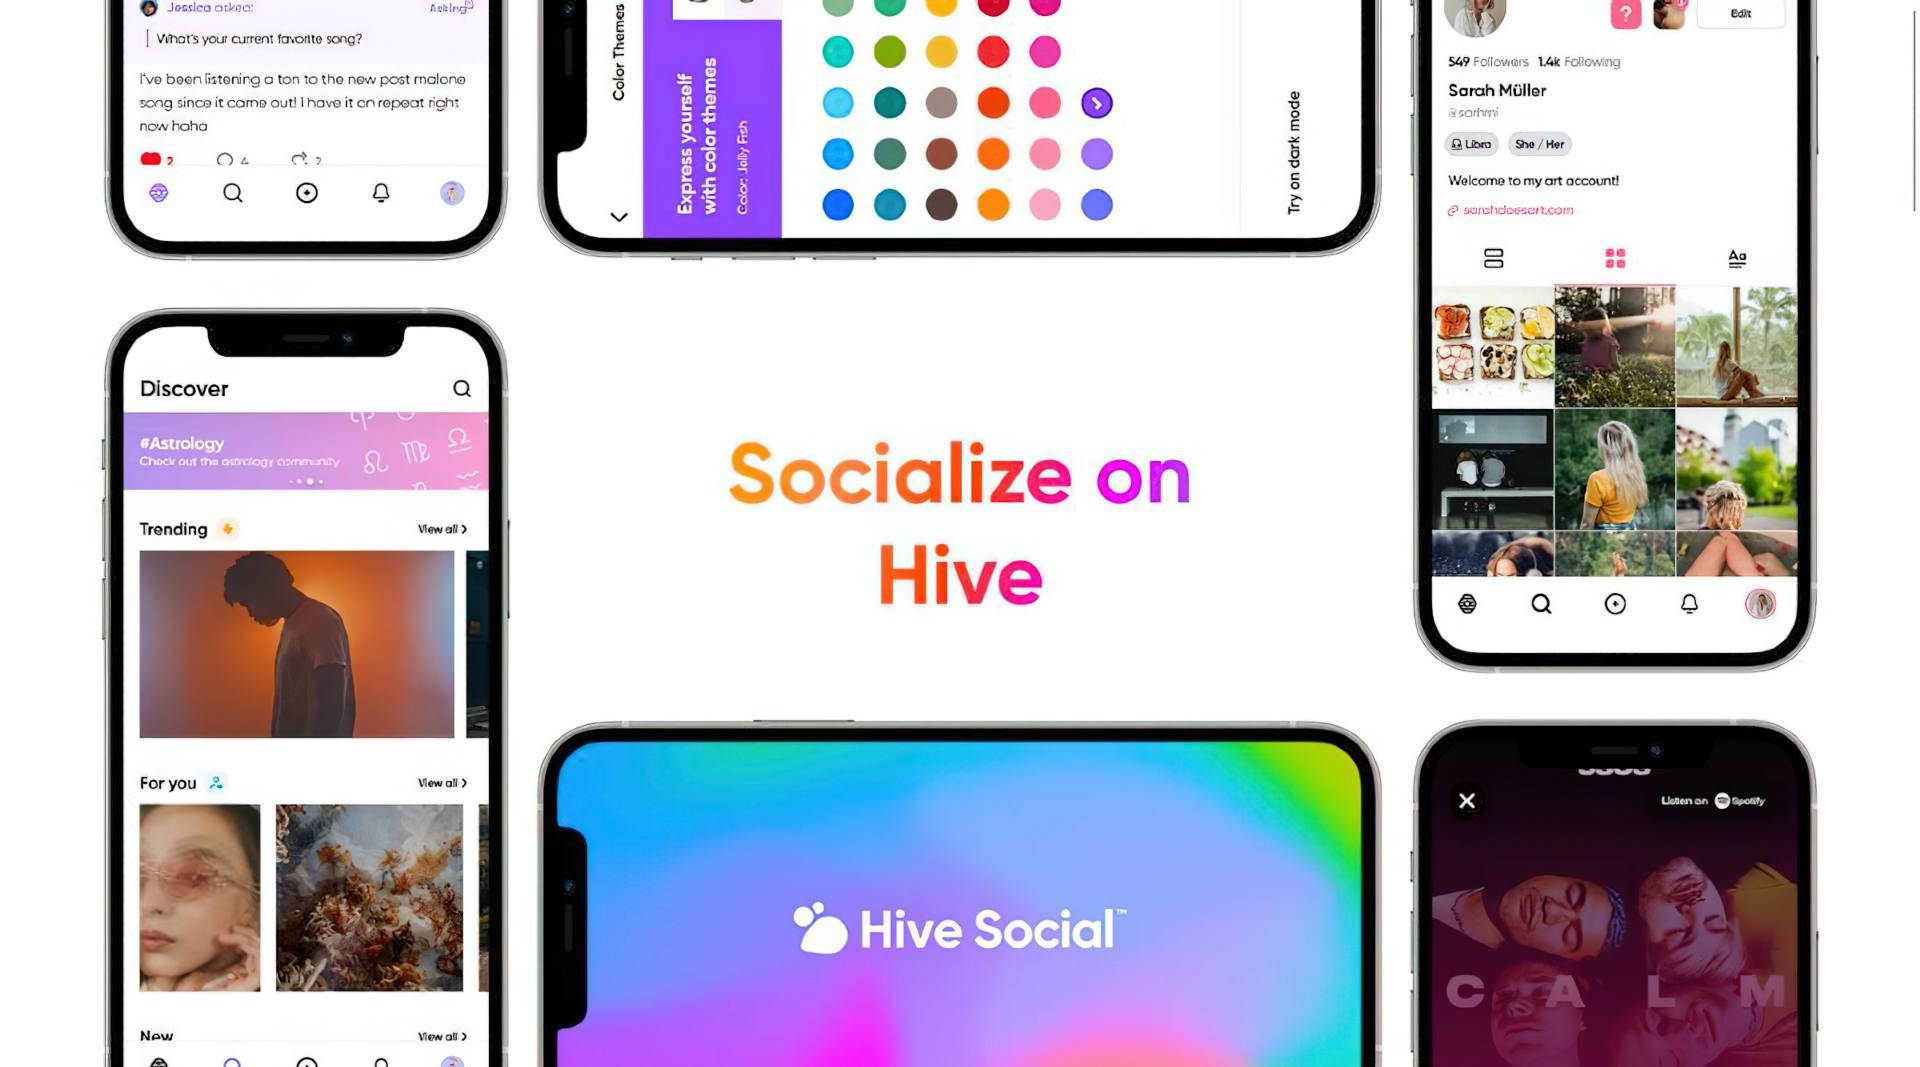 Hive Social image gallery not working